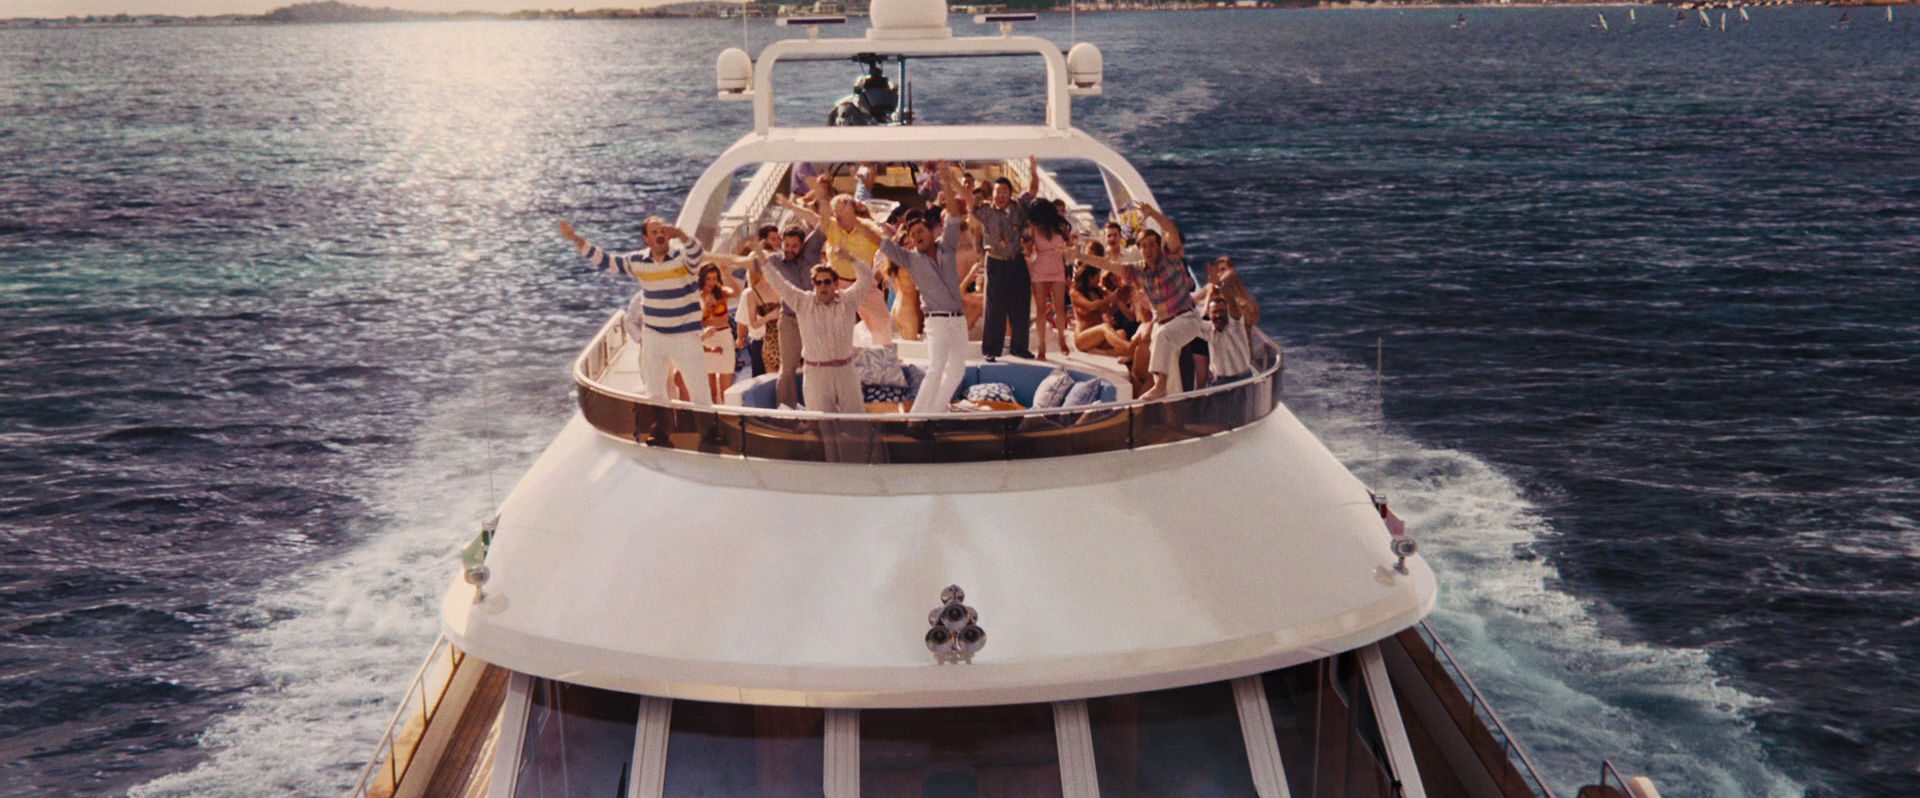 what yacht was used in wolf of wall street